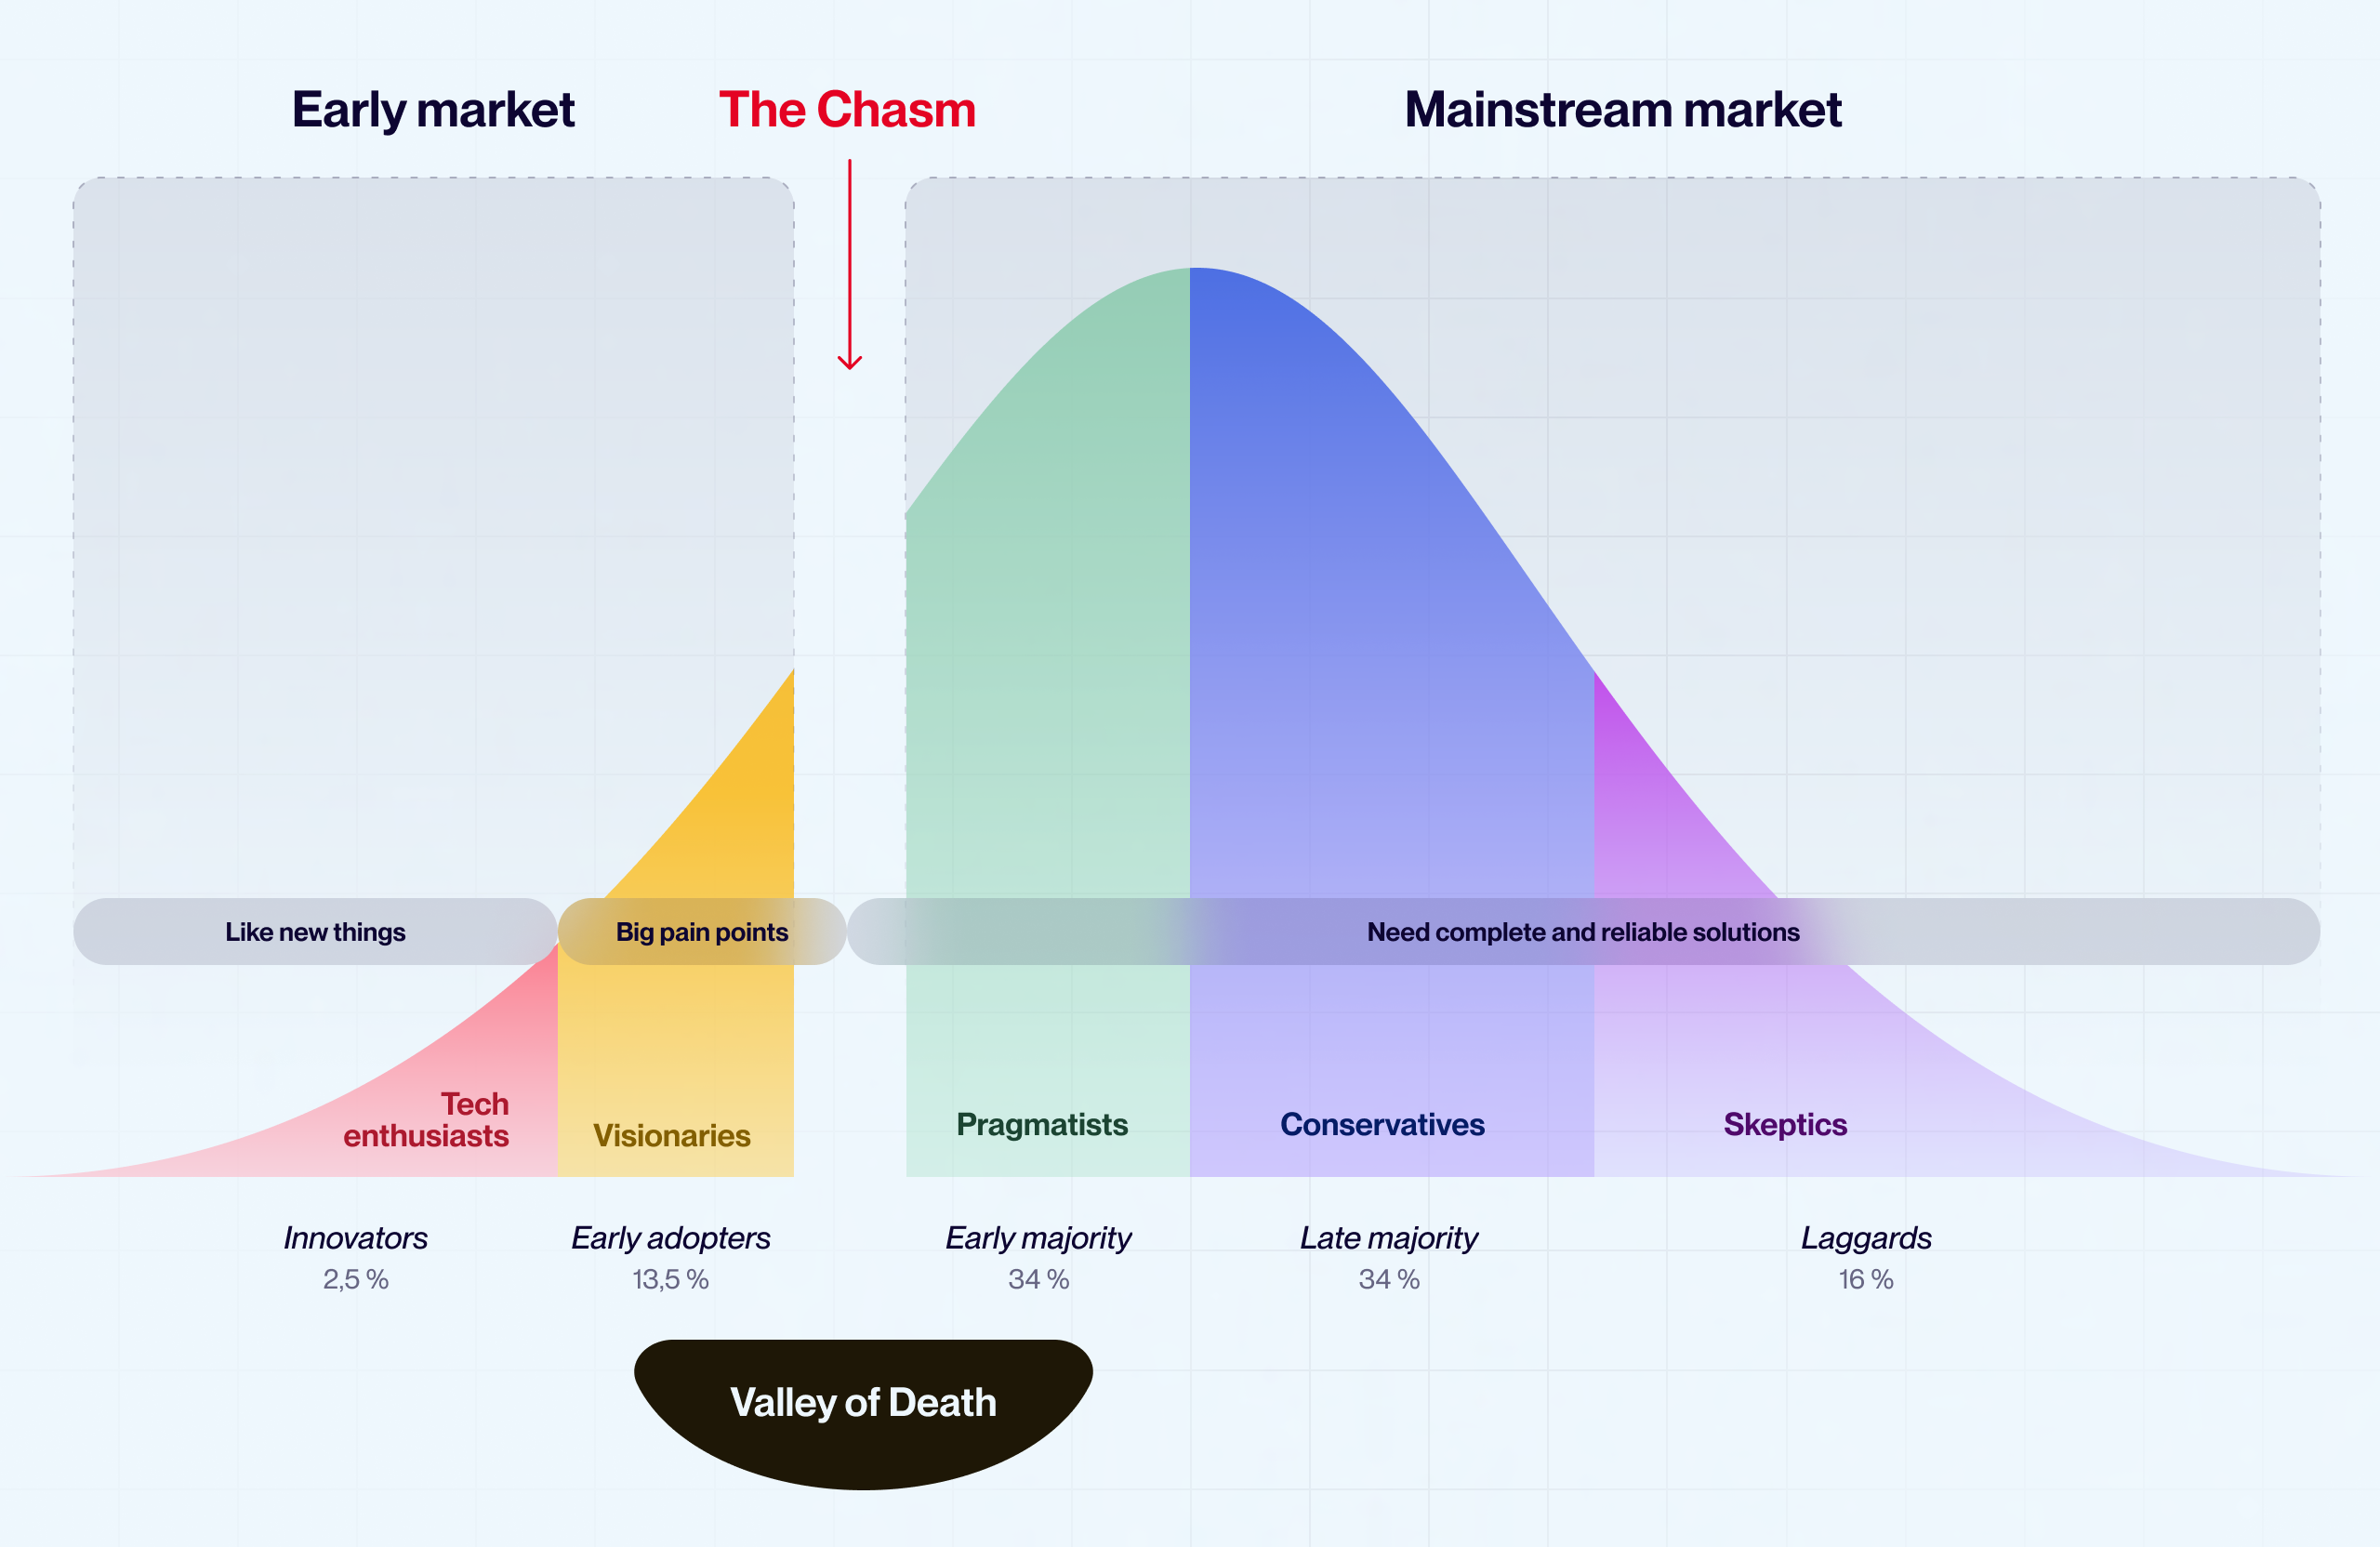 Understanding the "Chasm" in the diffusion curve between niche and mass